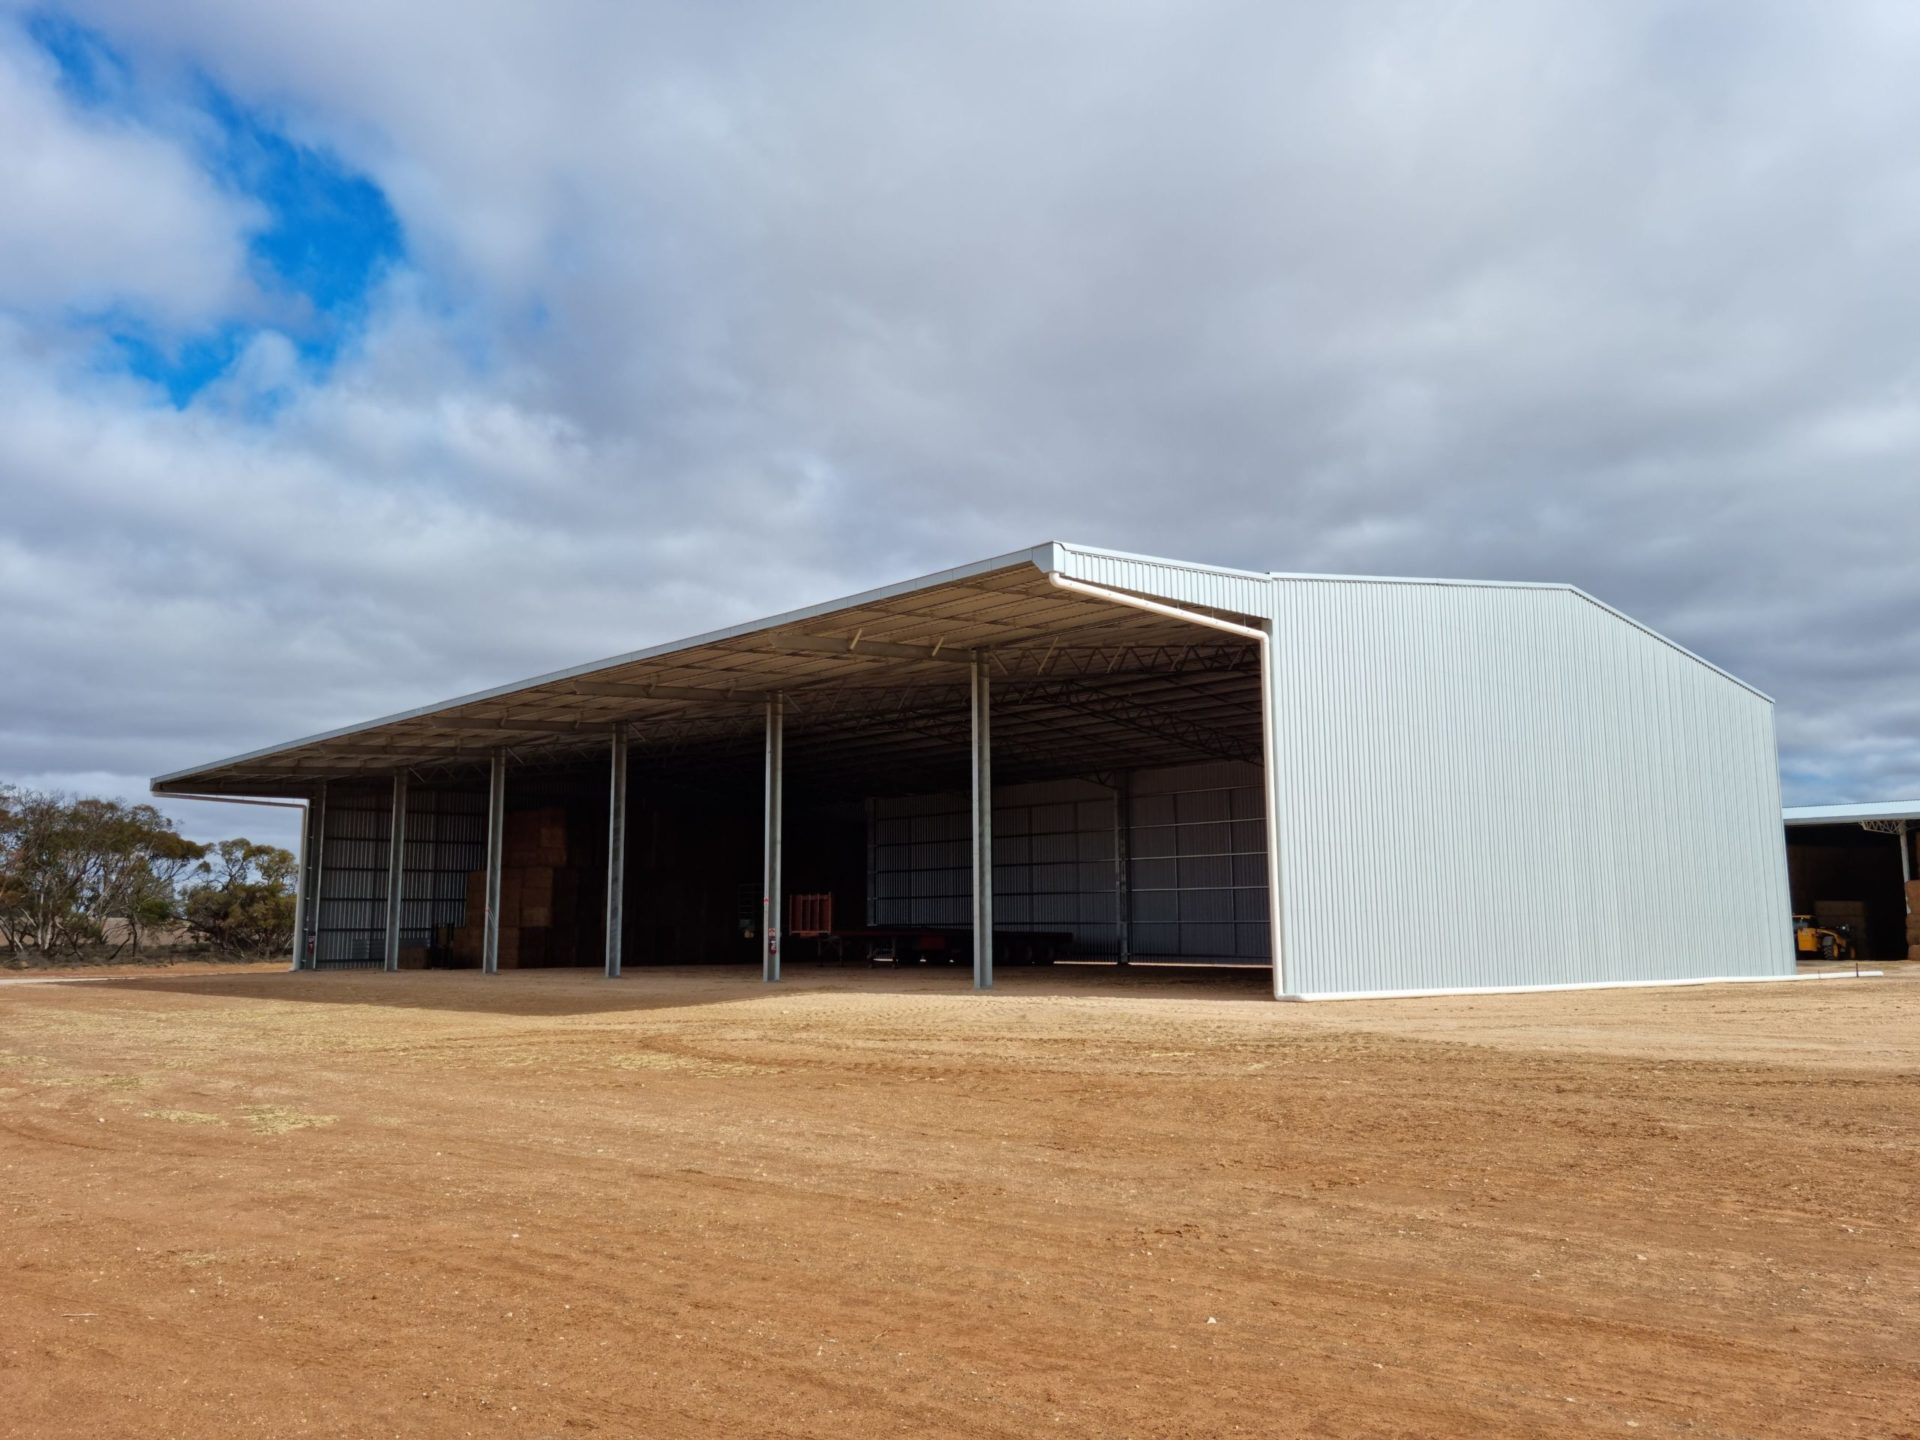 You are currently viewing 49.5m x 24m x 8m open-front hay shed with 6m canopy